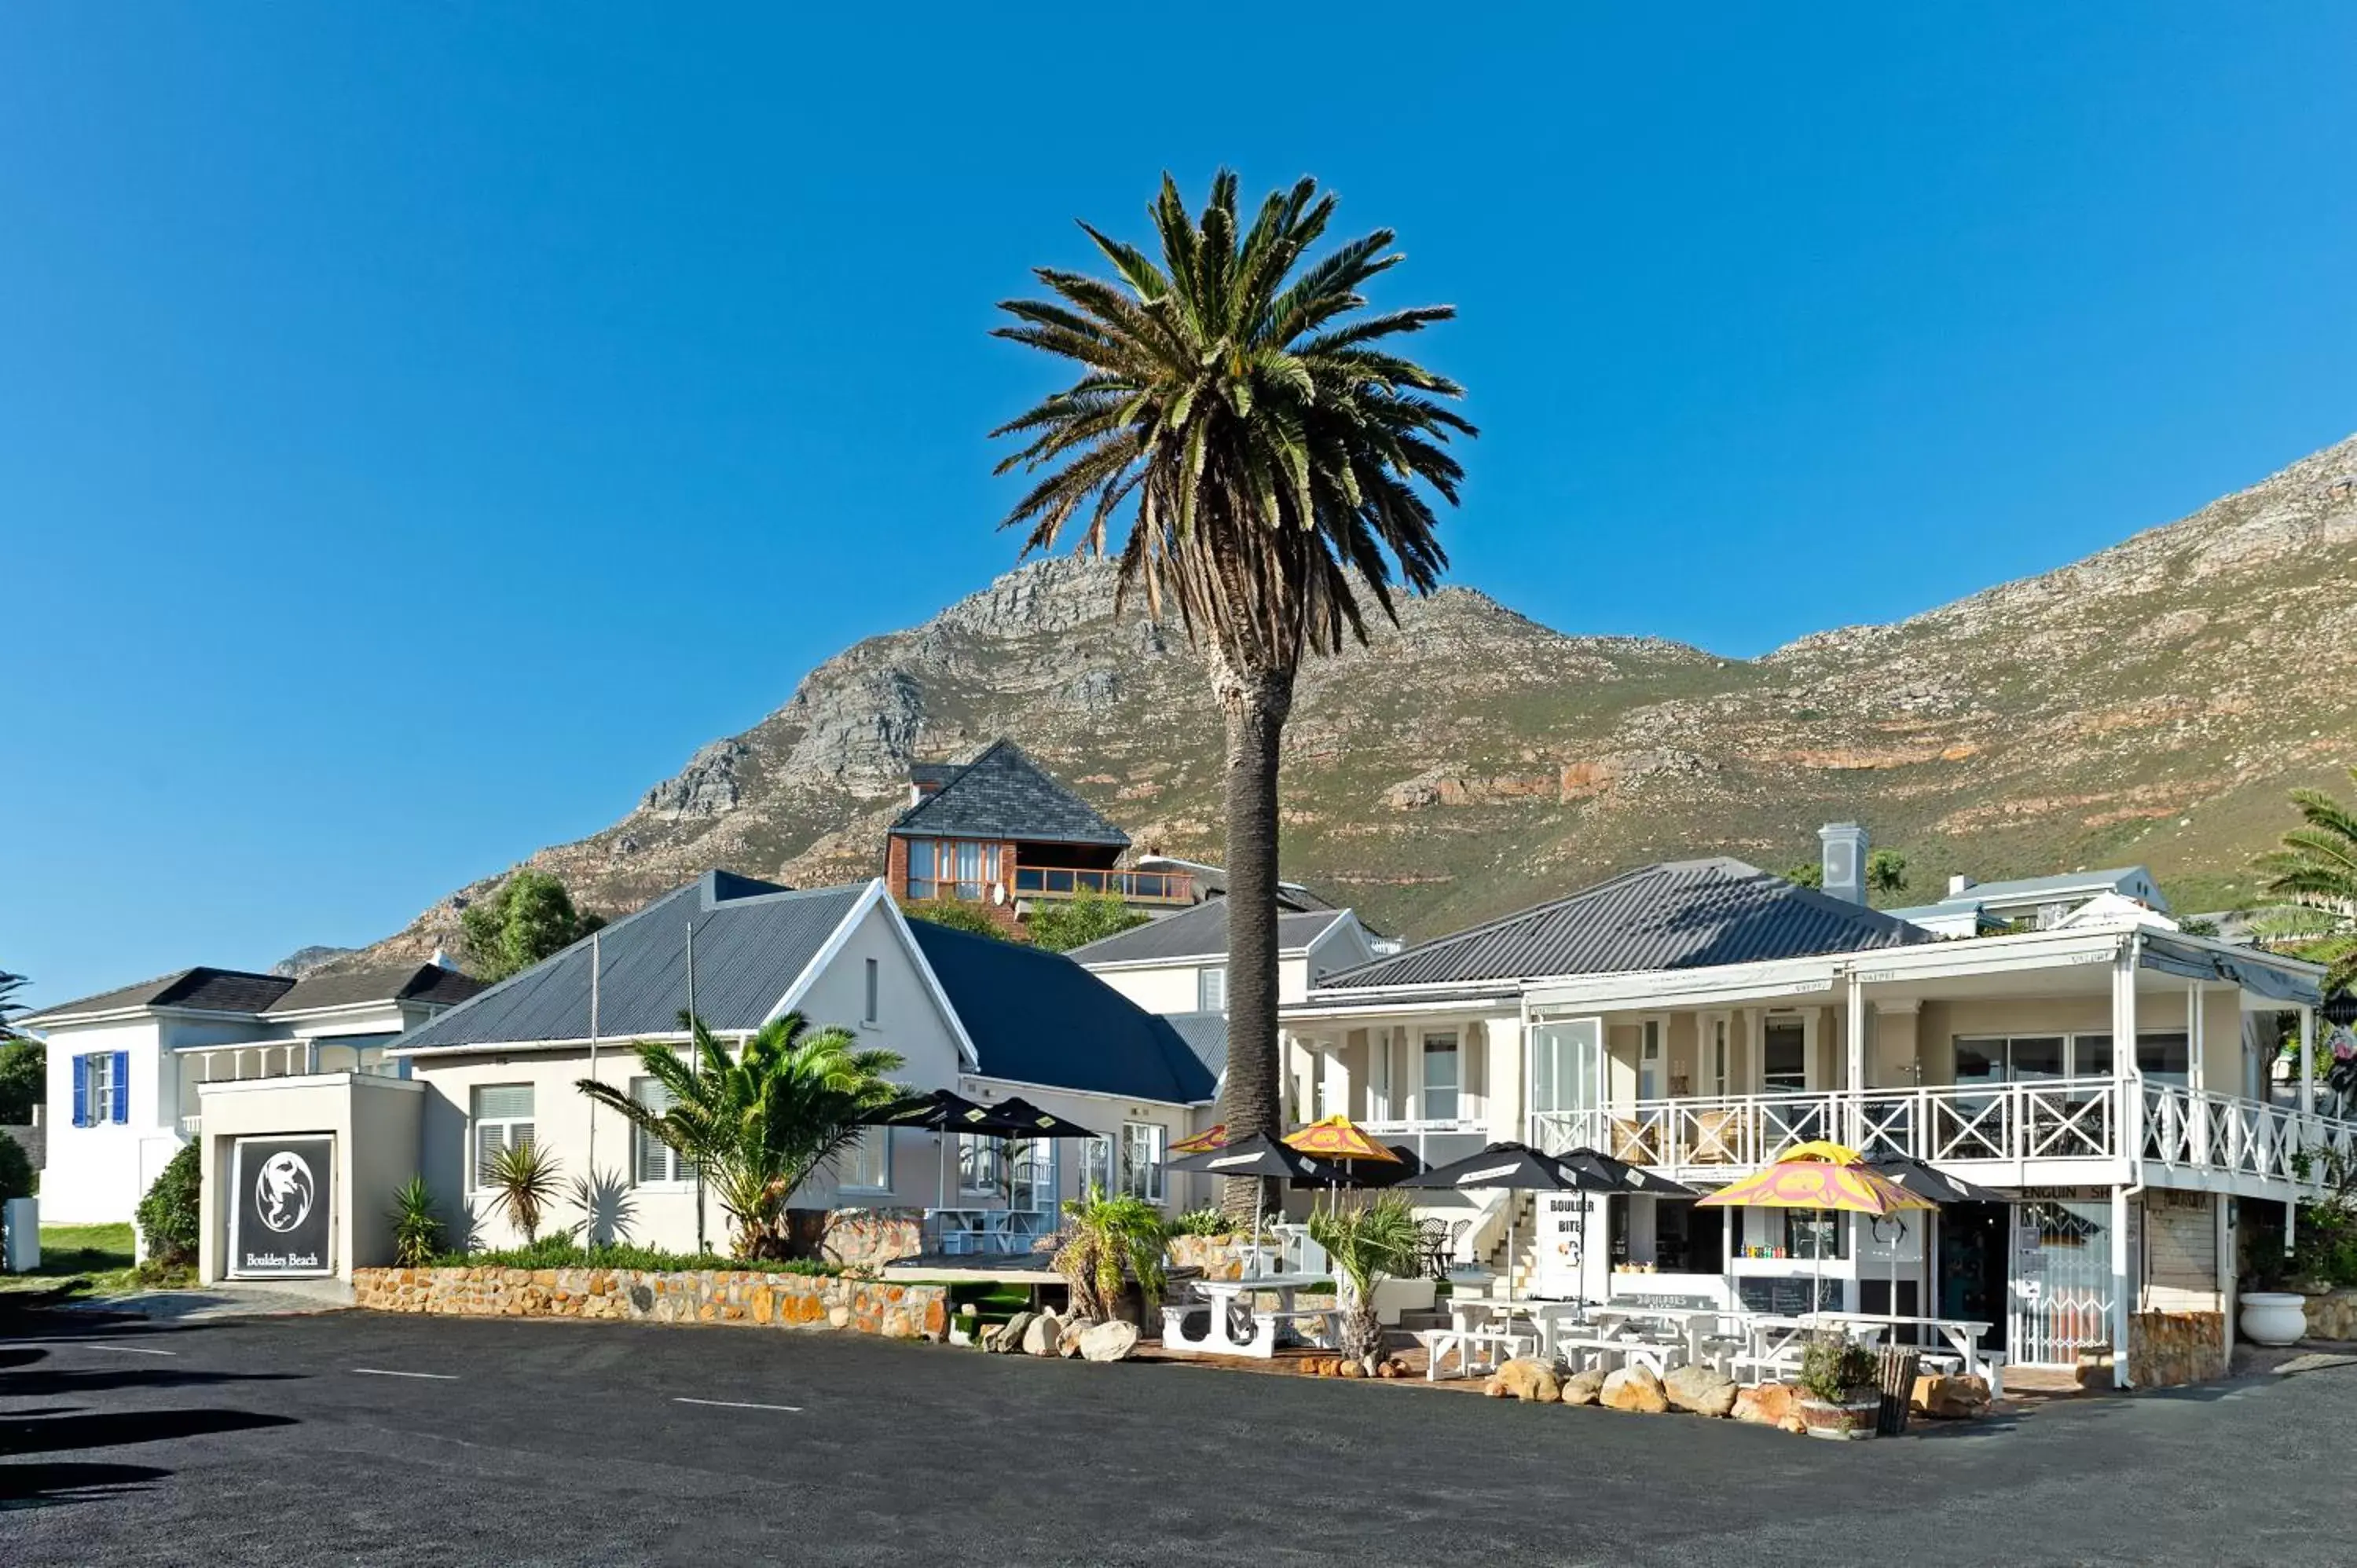 Property Building in Boulders Beach Hotel, Cafe and Curio shop